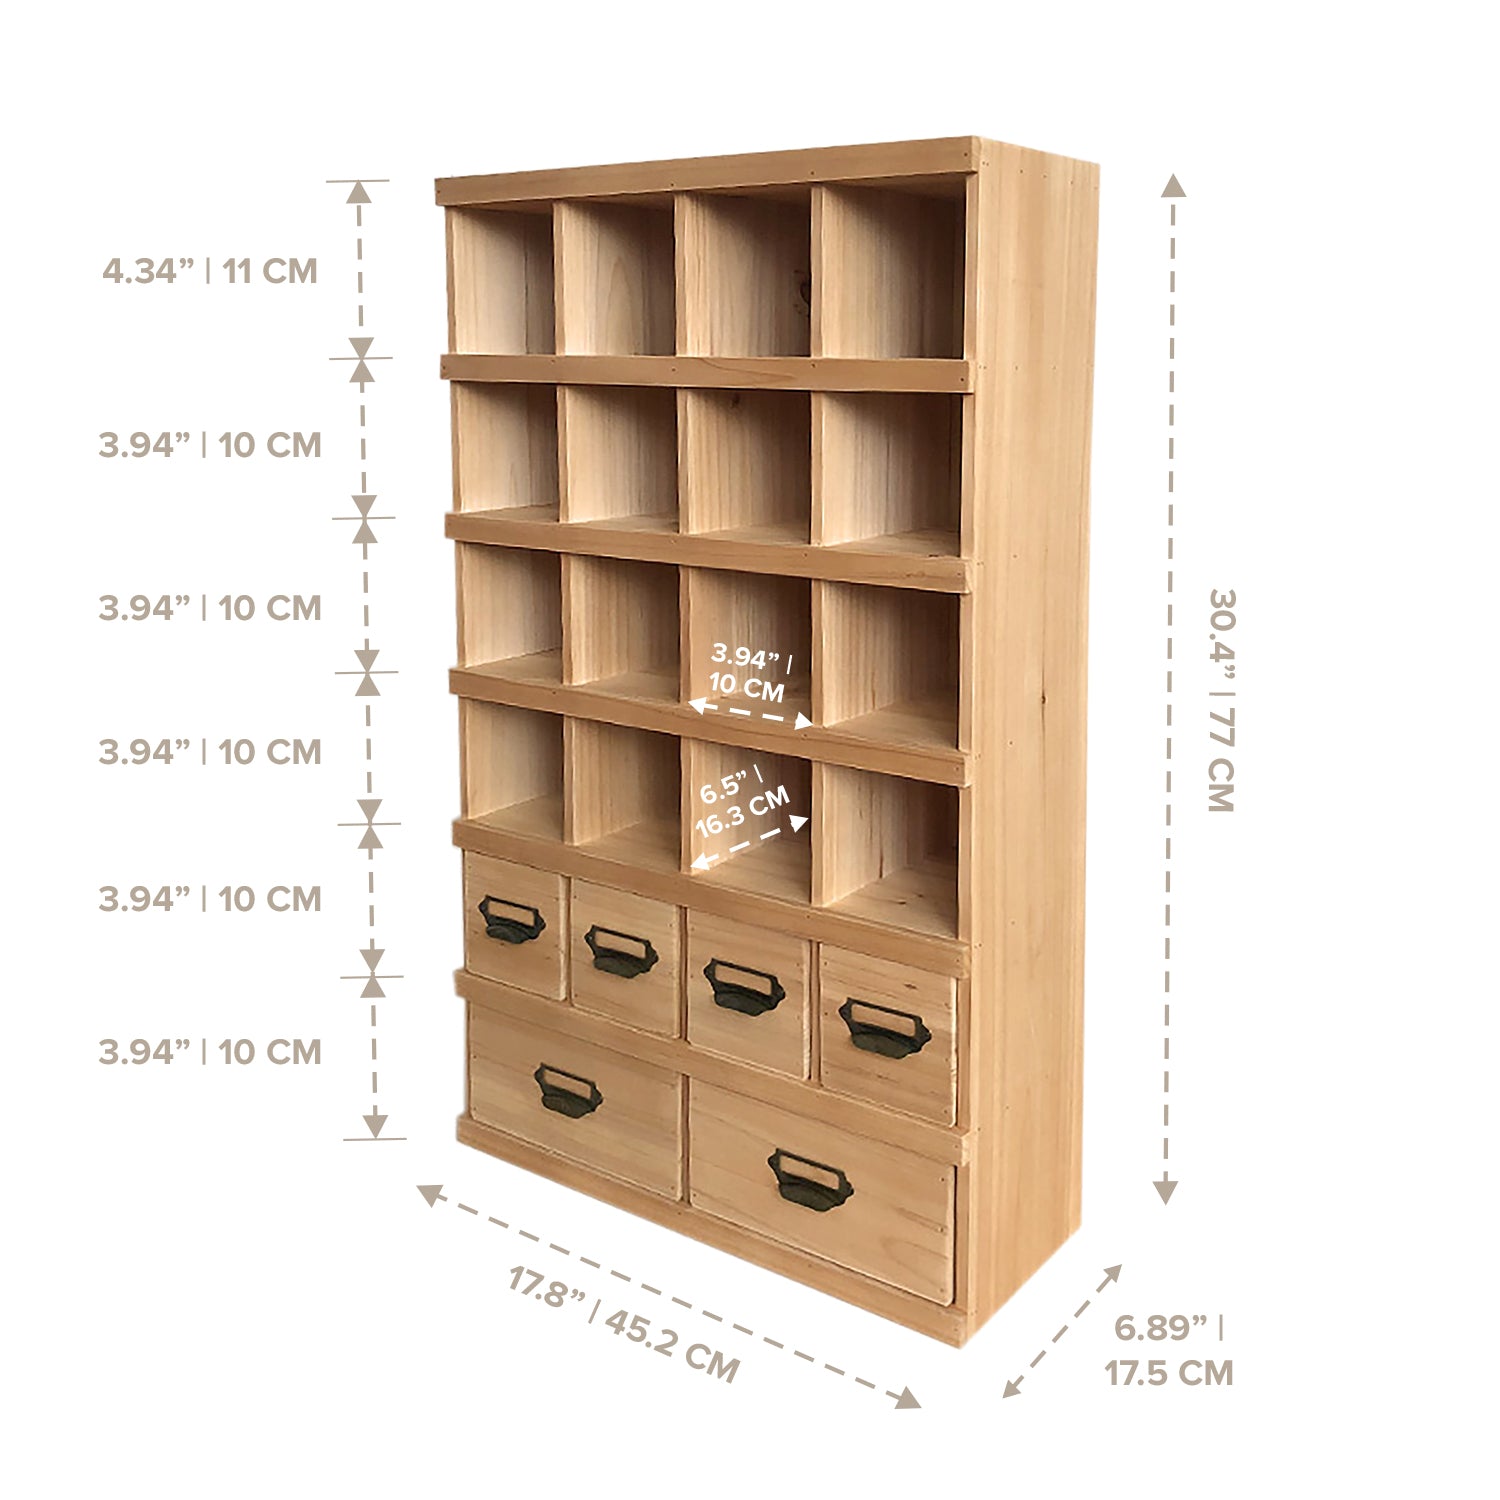 Load image into Gallery viewer, Chest Of Drawers Wood Cubby Cabinet | 12-Slot Wood Shelf w/ 6 Drawers Mailroom Card Organizer